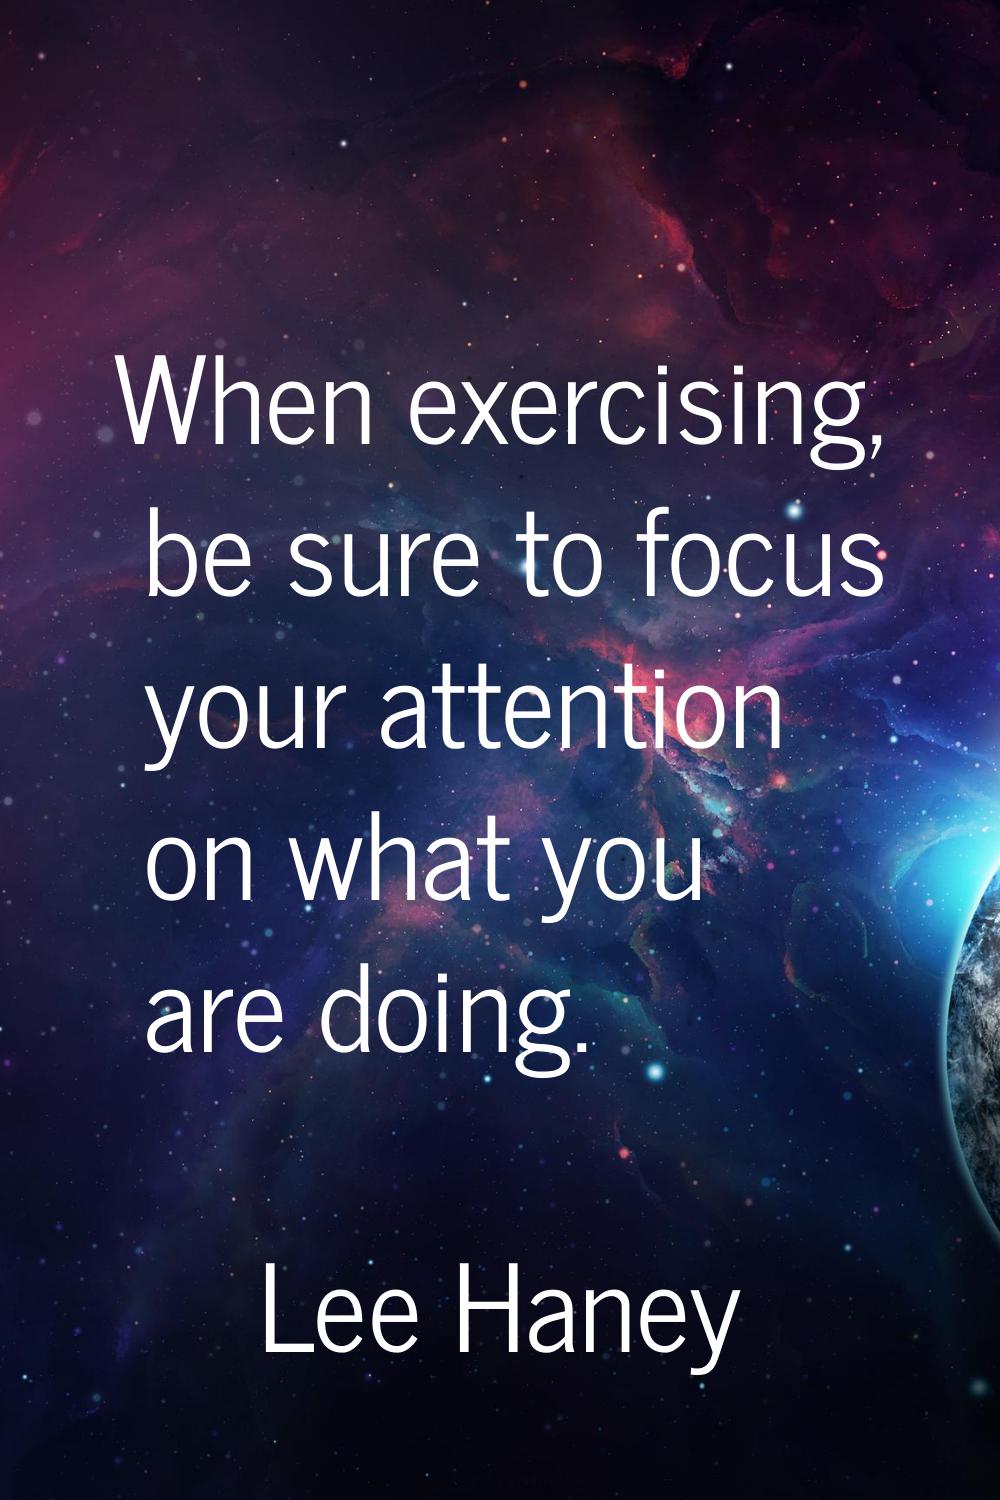 When exercising, be sure to focus your attention on what you are doing.